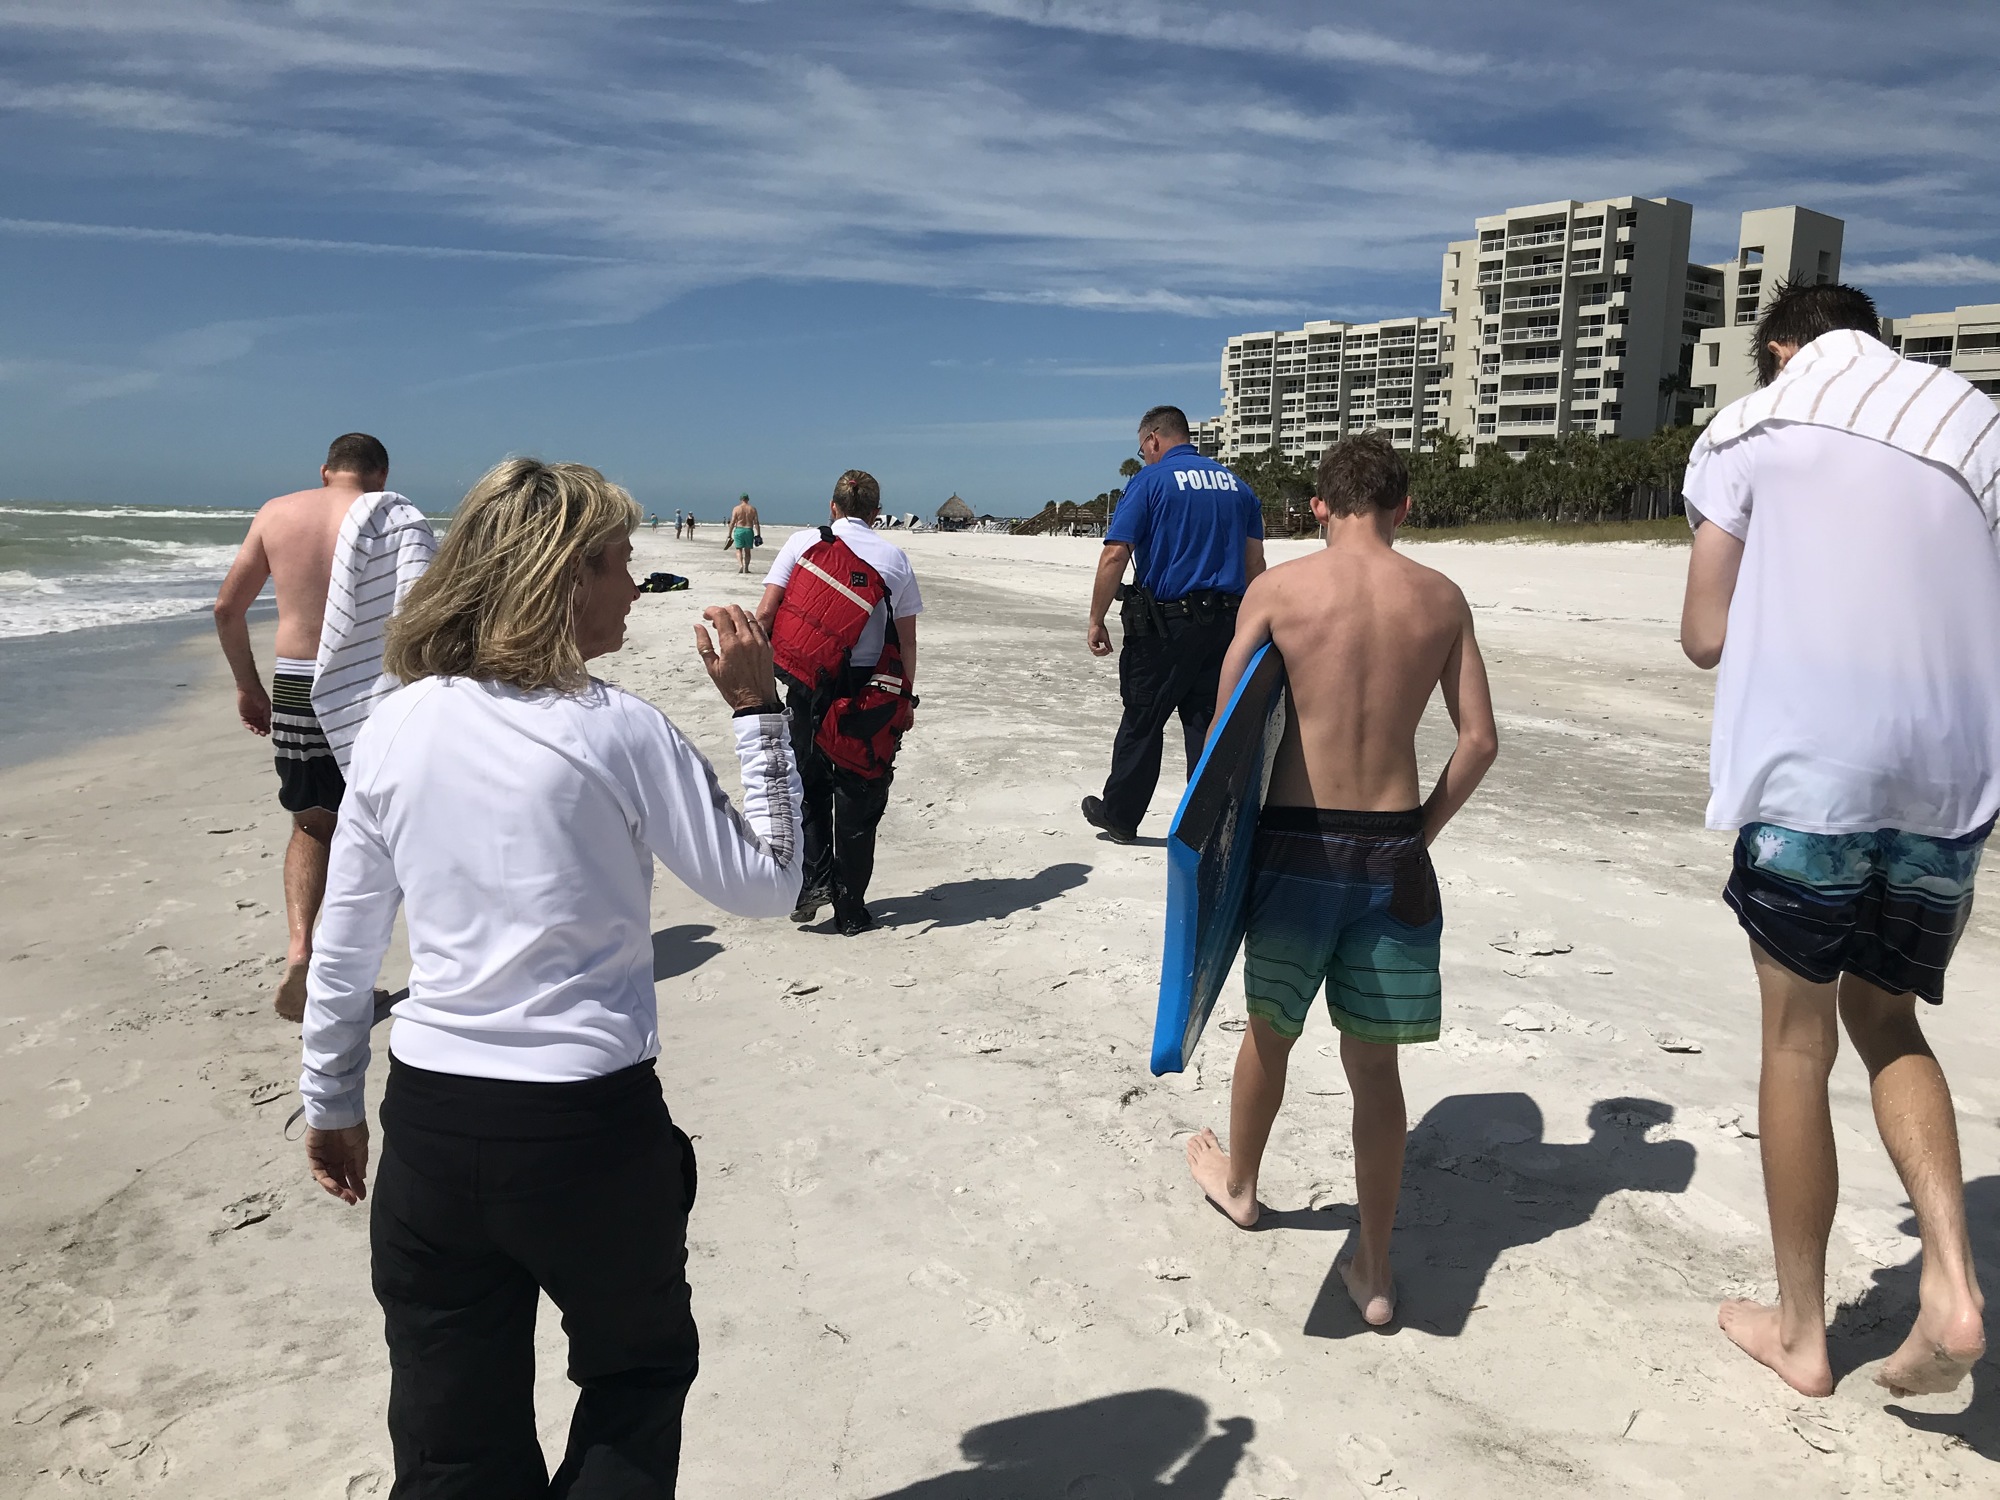 First responders walk on the beach with the family that was affected by the rip current March 6 near Longboat Key Club. (Photo courtesy of the Longboat Key Fire Rescue Department)